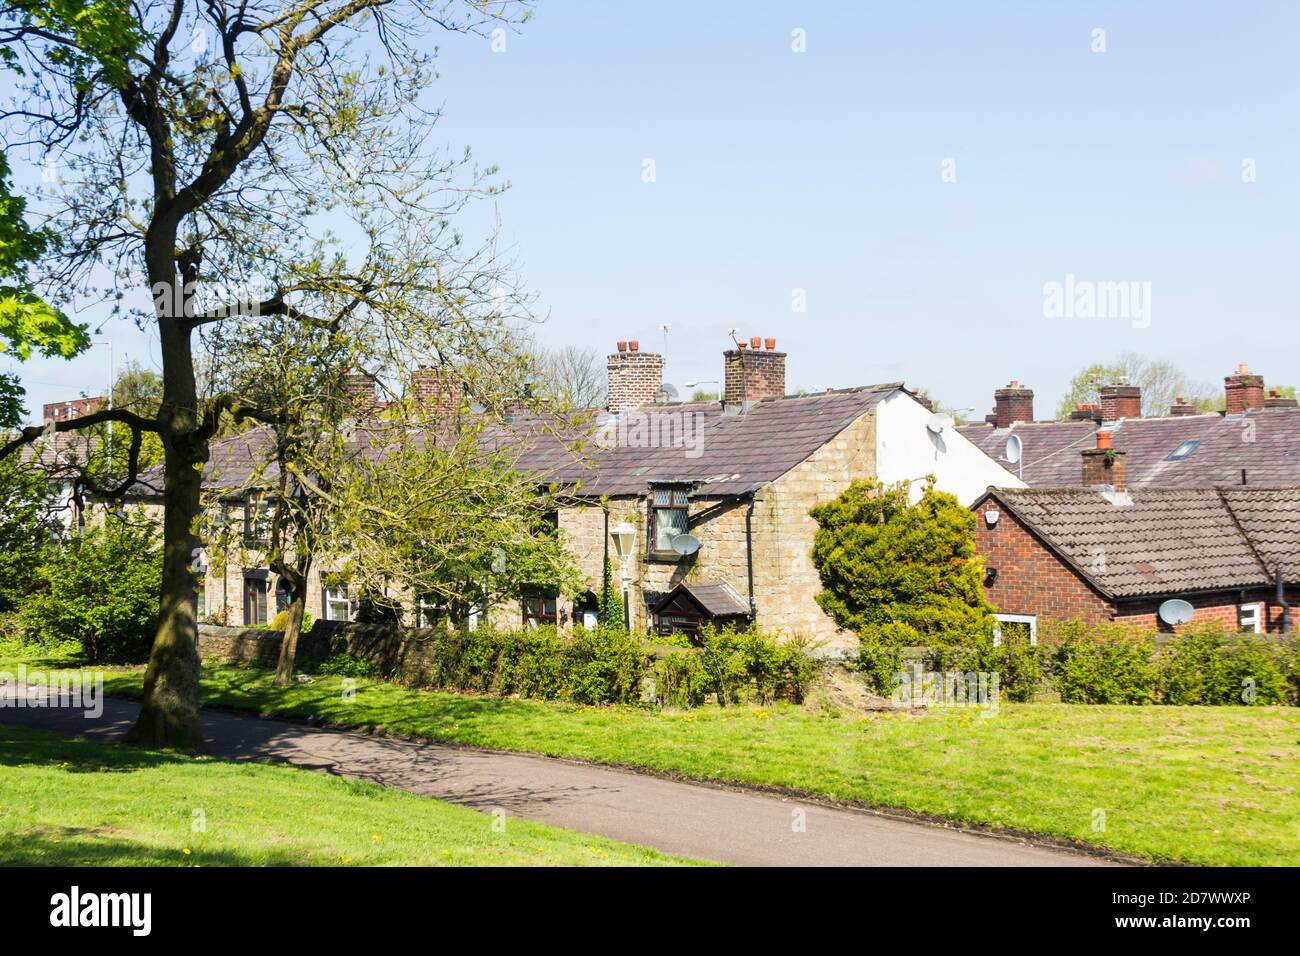 Early 19th century stone cottages, formerly mill worker homes on Greenside, Farnworth, a conservation area on the edge of Farnworth central park. Stock Photo